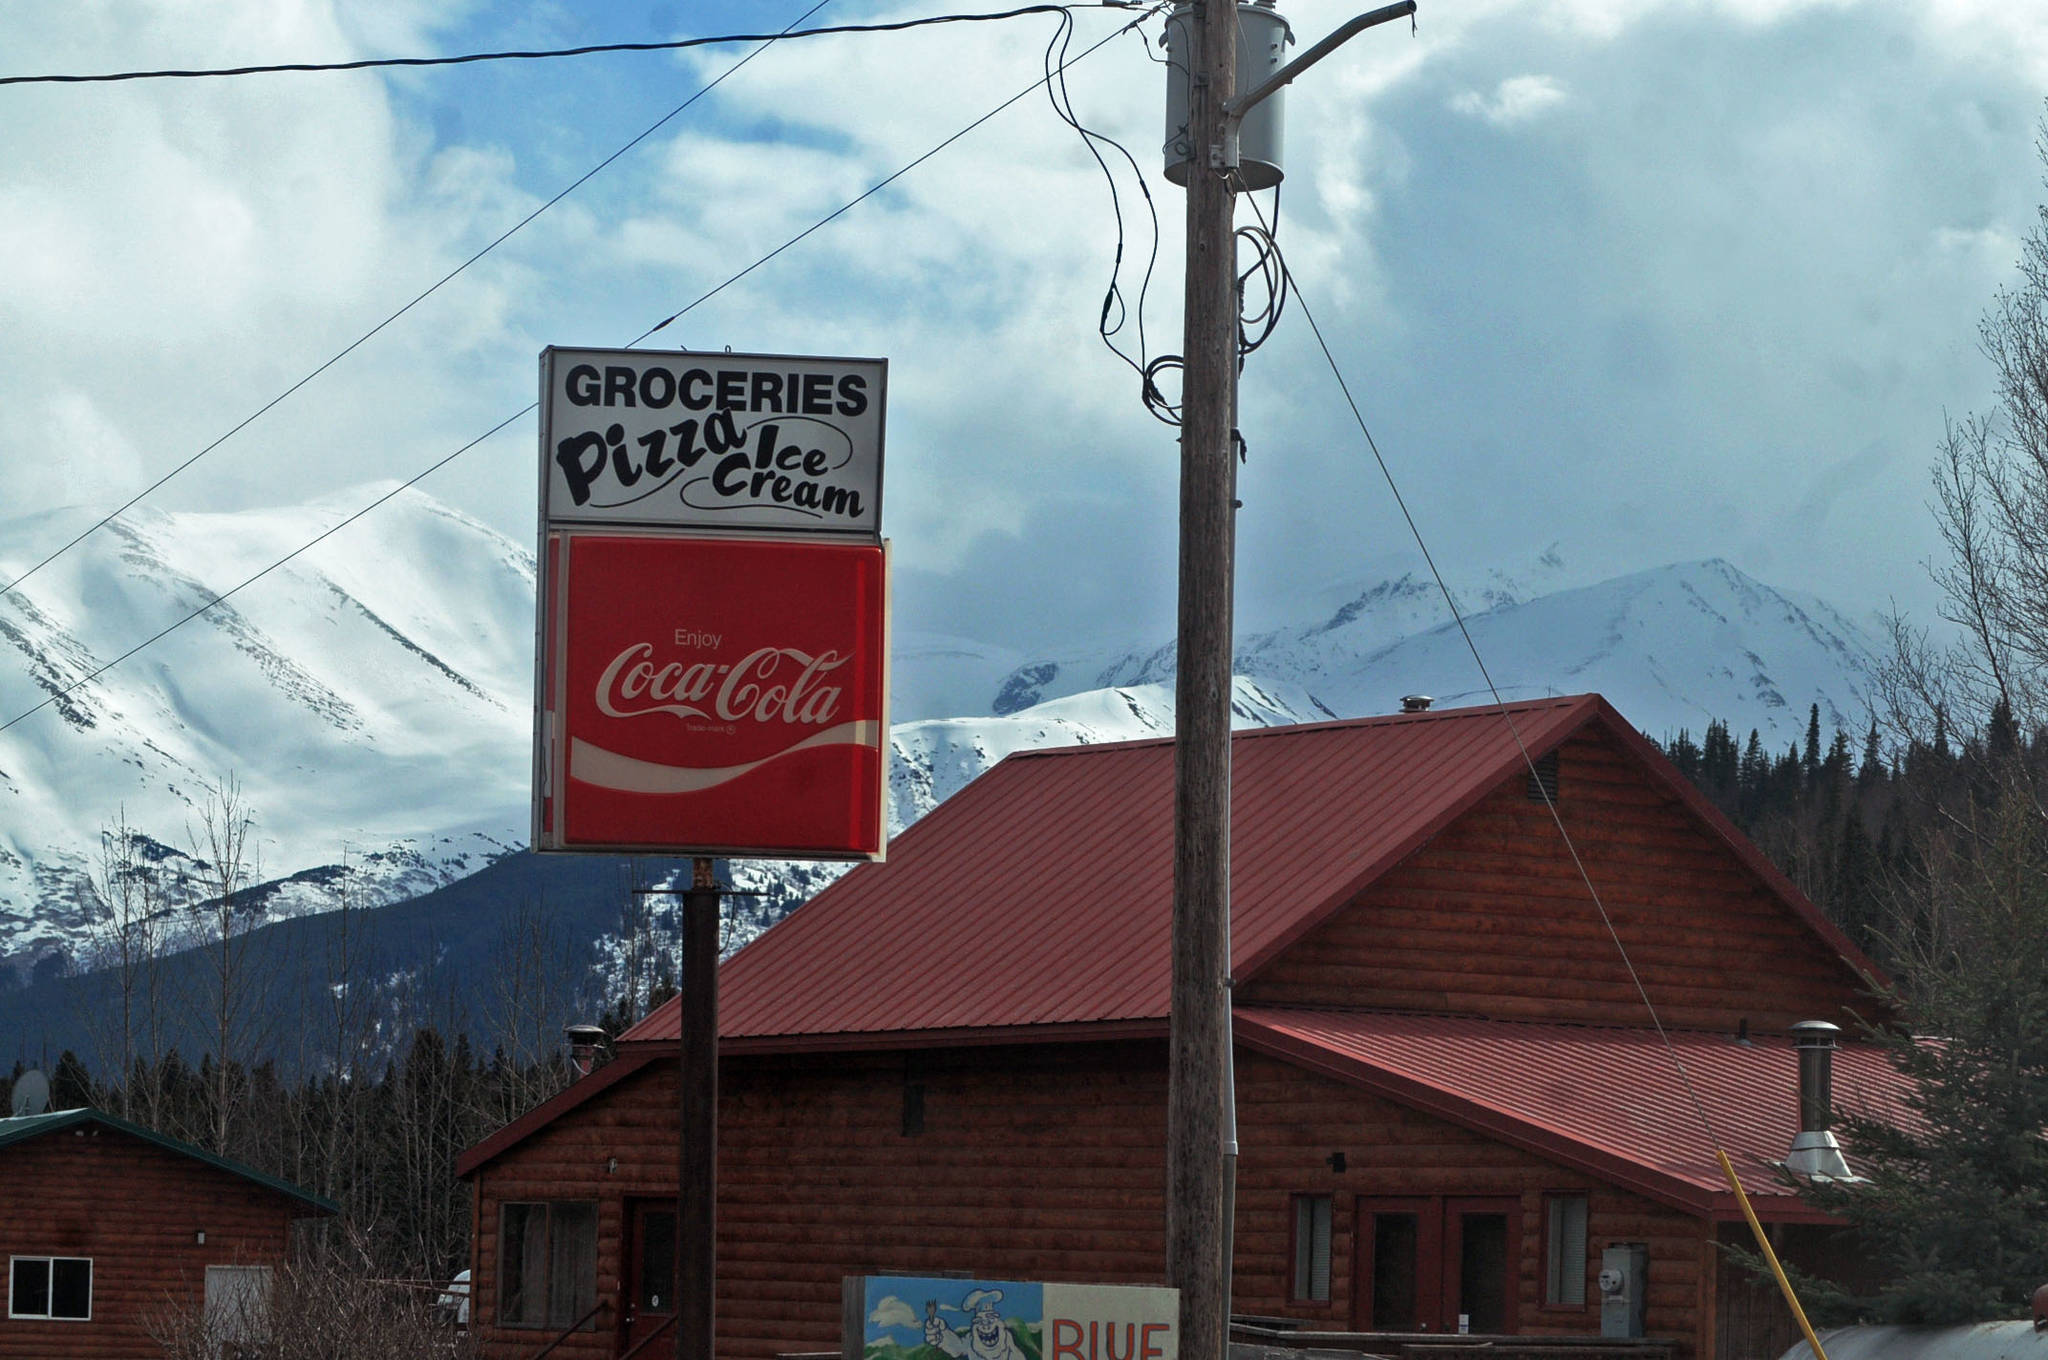 Snow-covered mountains provide a backdrop for Cooper Landing in this April 11 photo. The Sterling Highway, the main corridor to and from the Kenai Peninsula, winds through the little community of Cooper Landing, often bringing dense traffic and car accidents with it, particularly in the summer. (Photo by Elizabeth Earl/Peninsula Clarion)